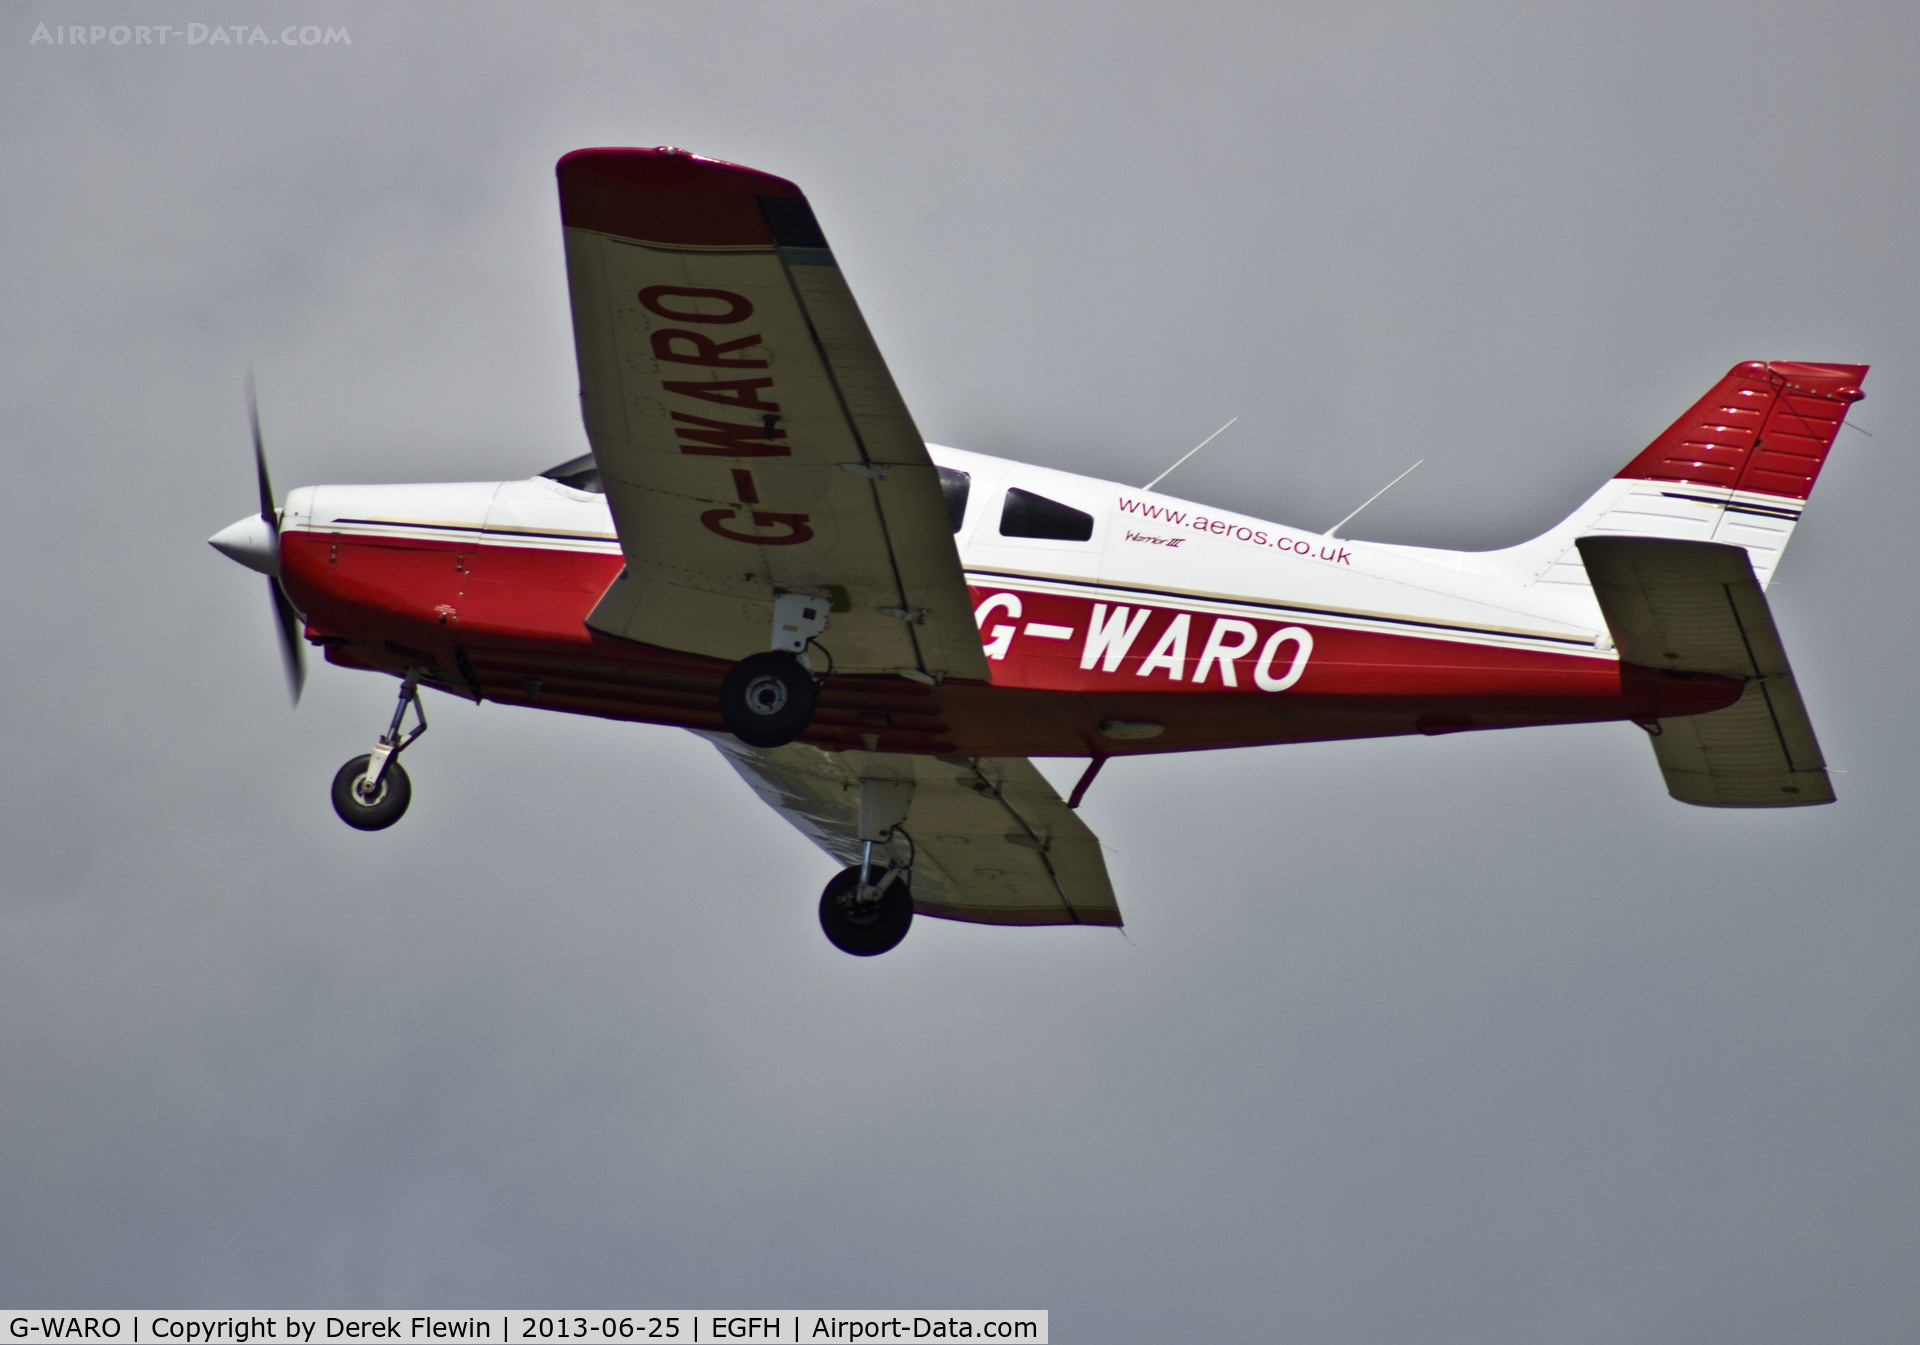 G-WARO, 1997 Piper PA-28-161 Cherokee Warrior III C/N 28-42015, Visiting Piper PA-28, dual based, Gloucester and CWI. Go-round runway 22.